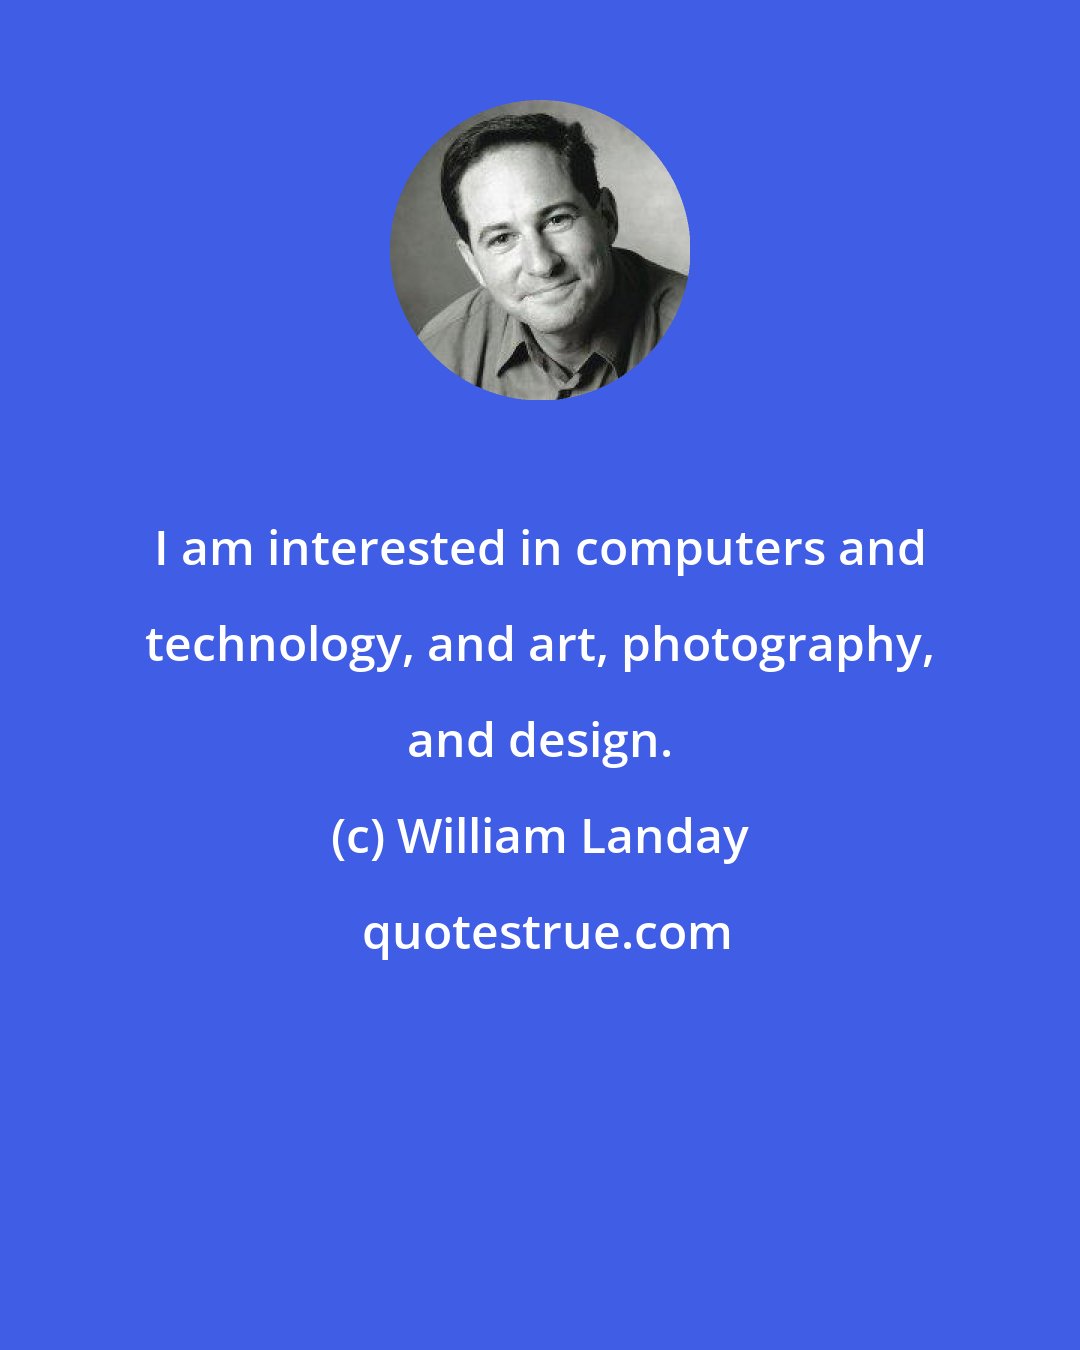 William Landay: I am interested in computers and technology, and art, photography, and design.